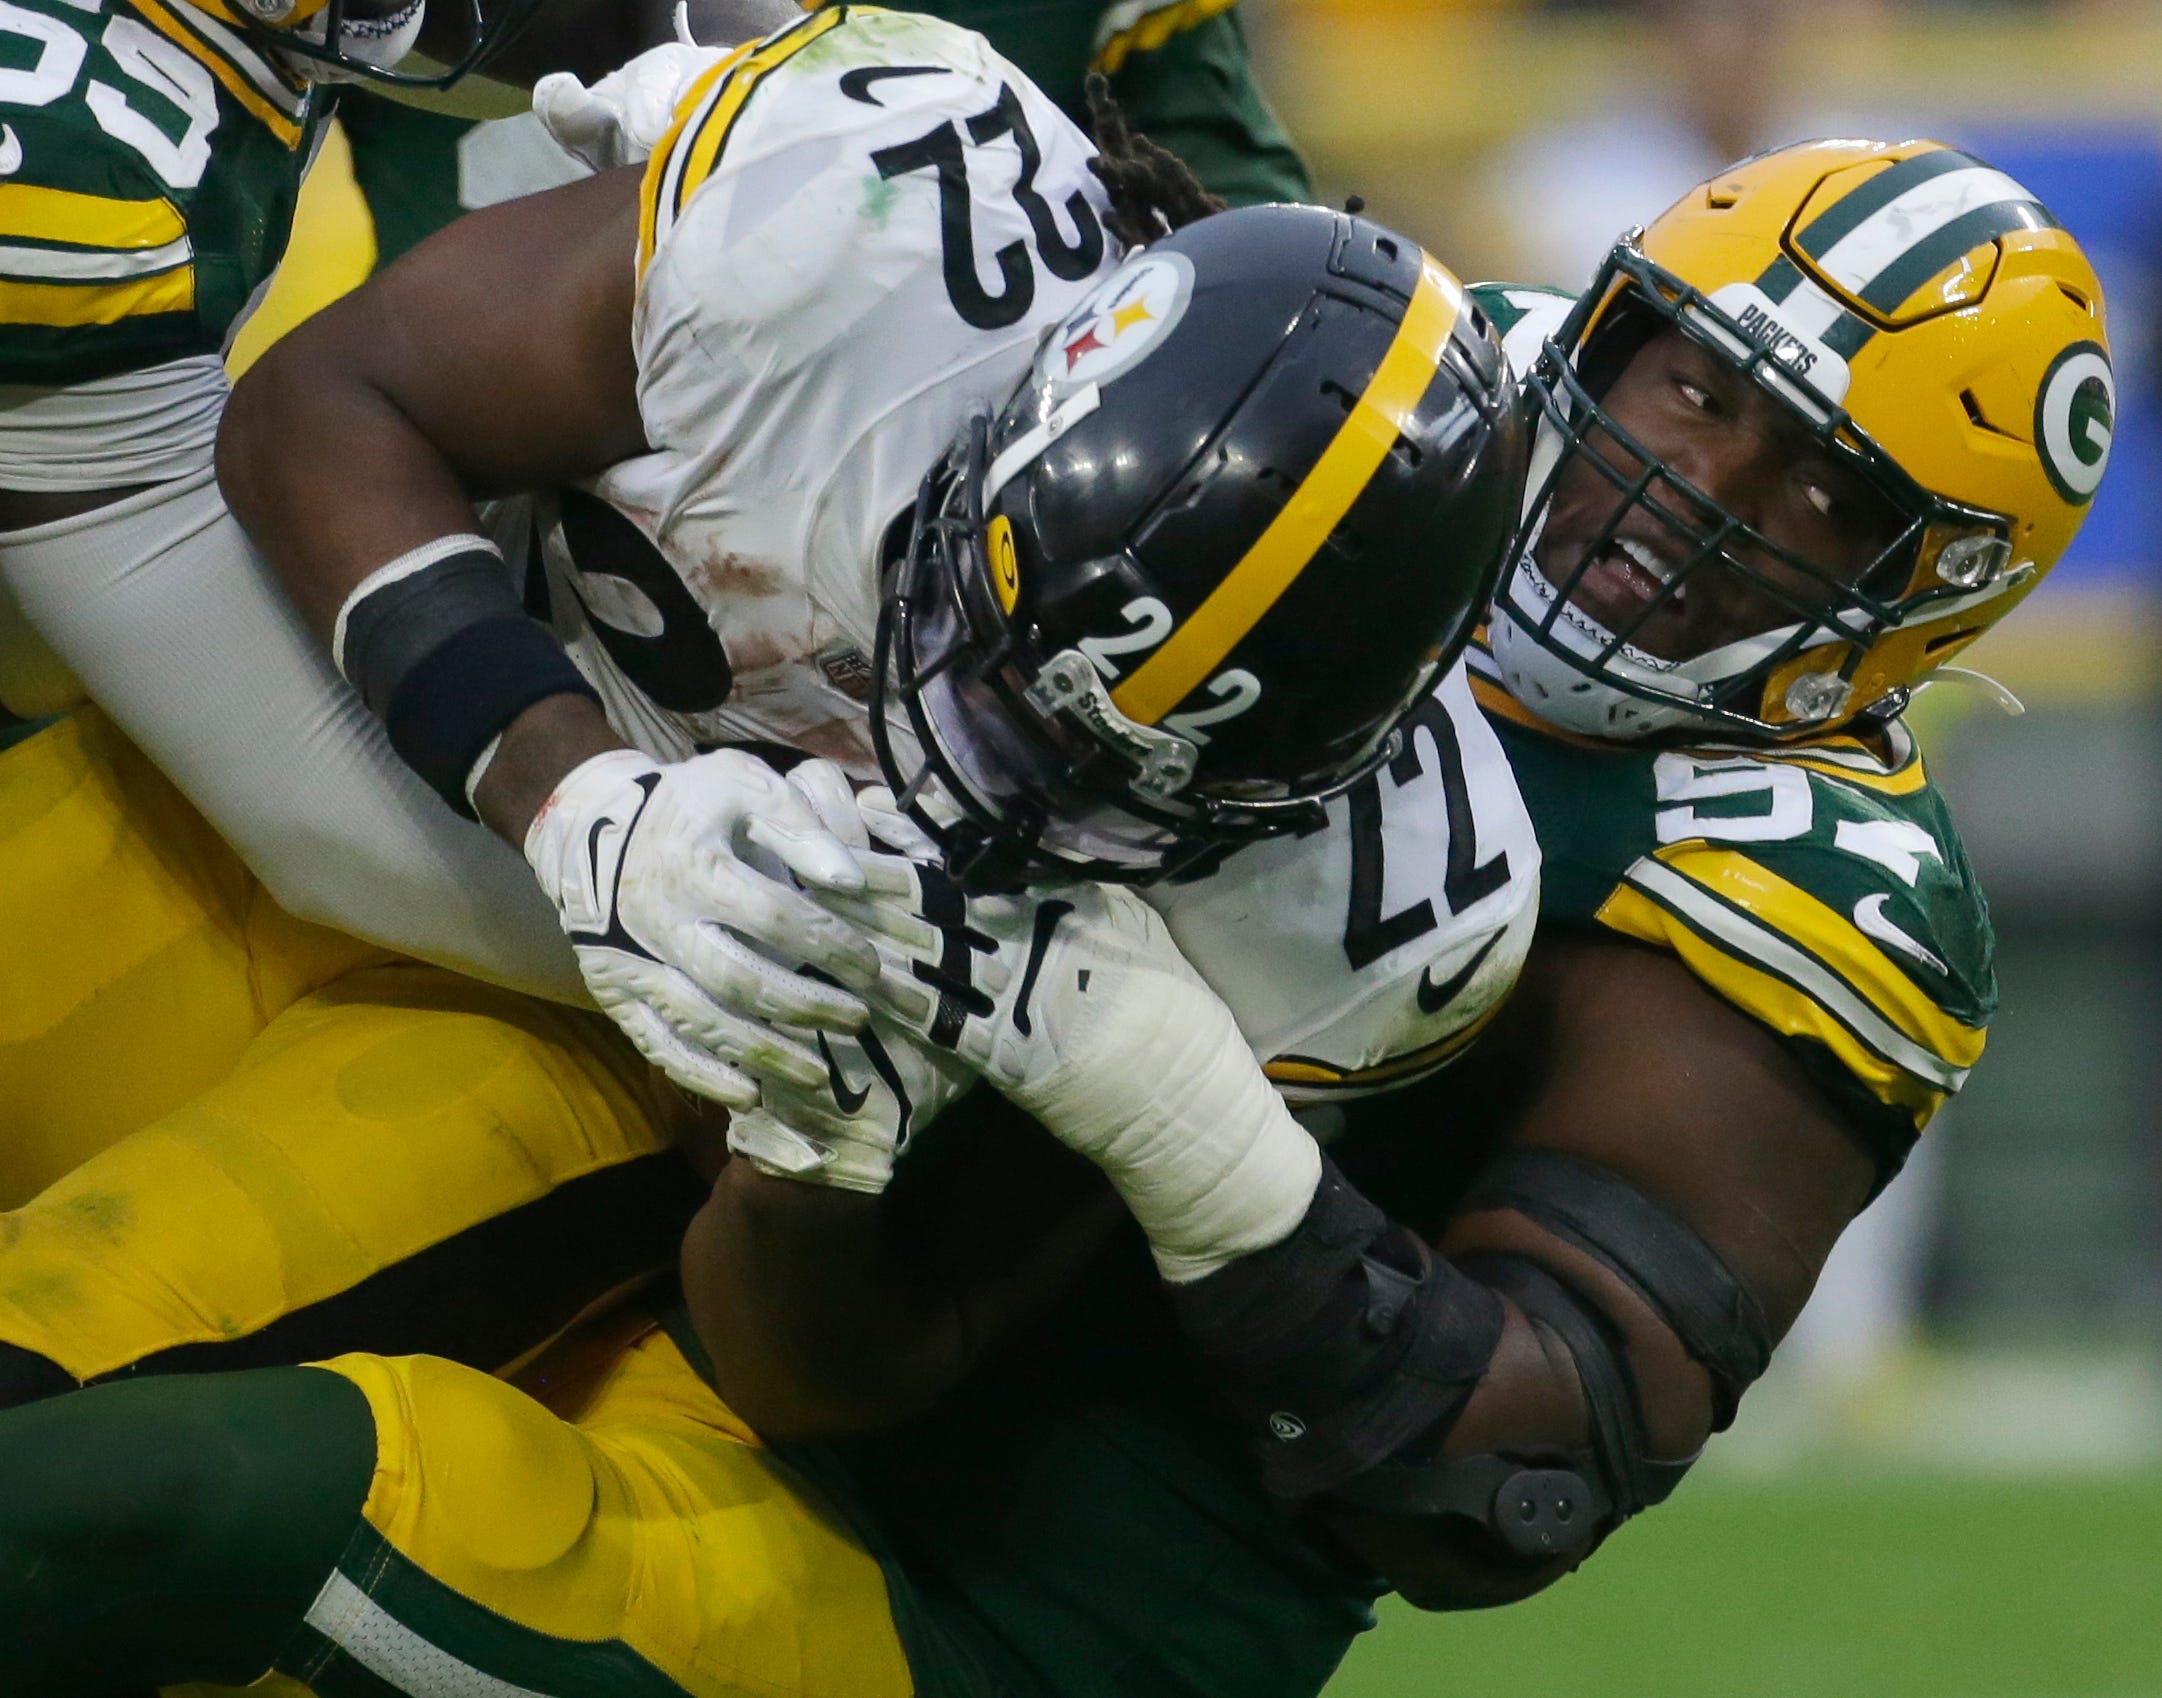 Green Bay Packers nose tackle Kenny Clark (97) stuffs Pittsburgh Steelers running back Najee Harris (22)- at the line during the third quarter of their game Sunday, October 3, 2021 at Lambeau Field in Green Bay, Wis. Green Bay Packers beat the Pittsburgh Steelers 27-17.